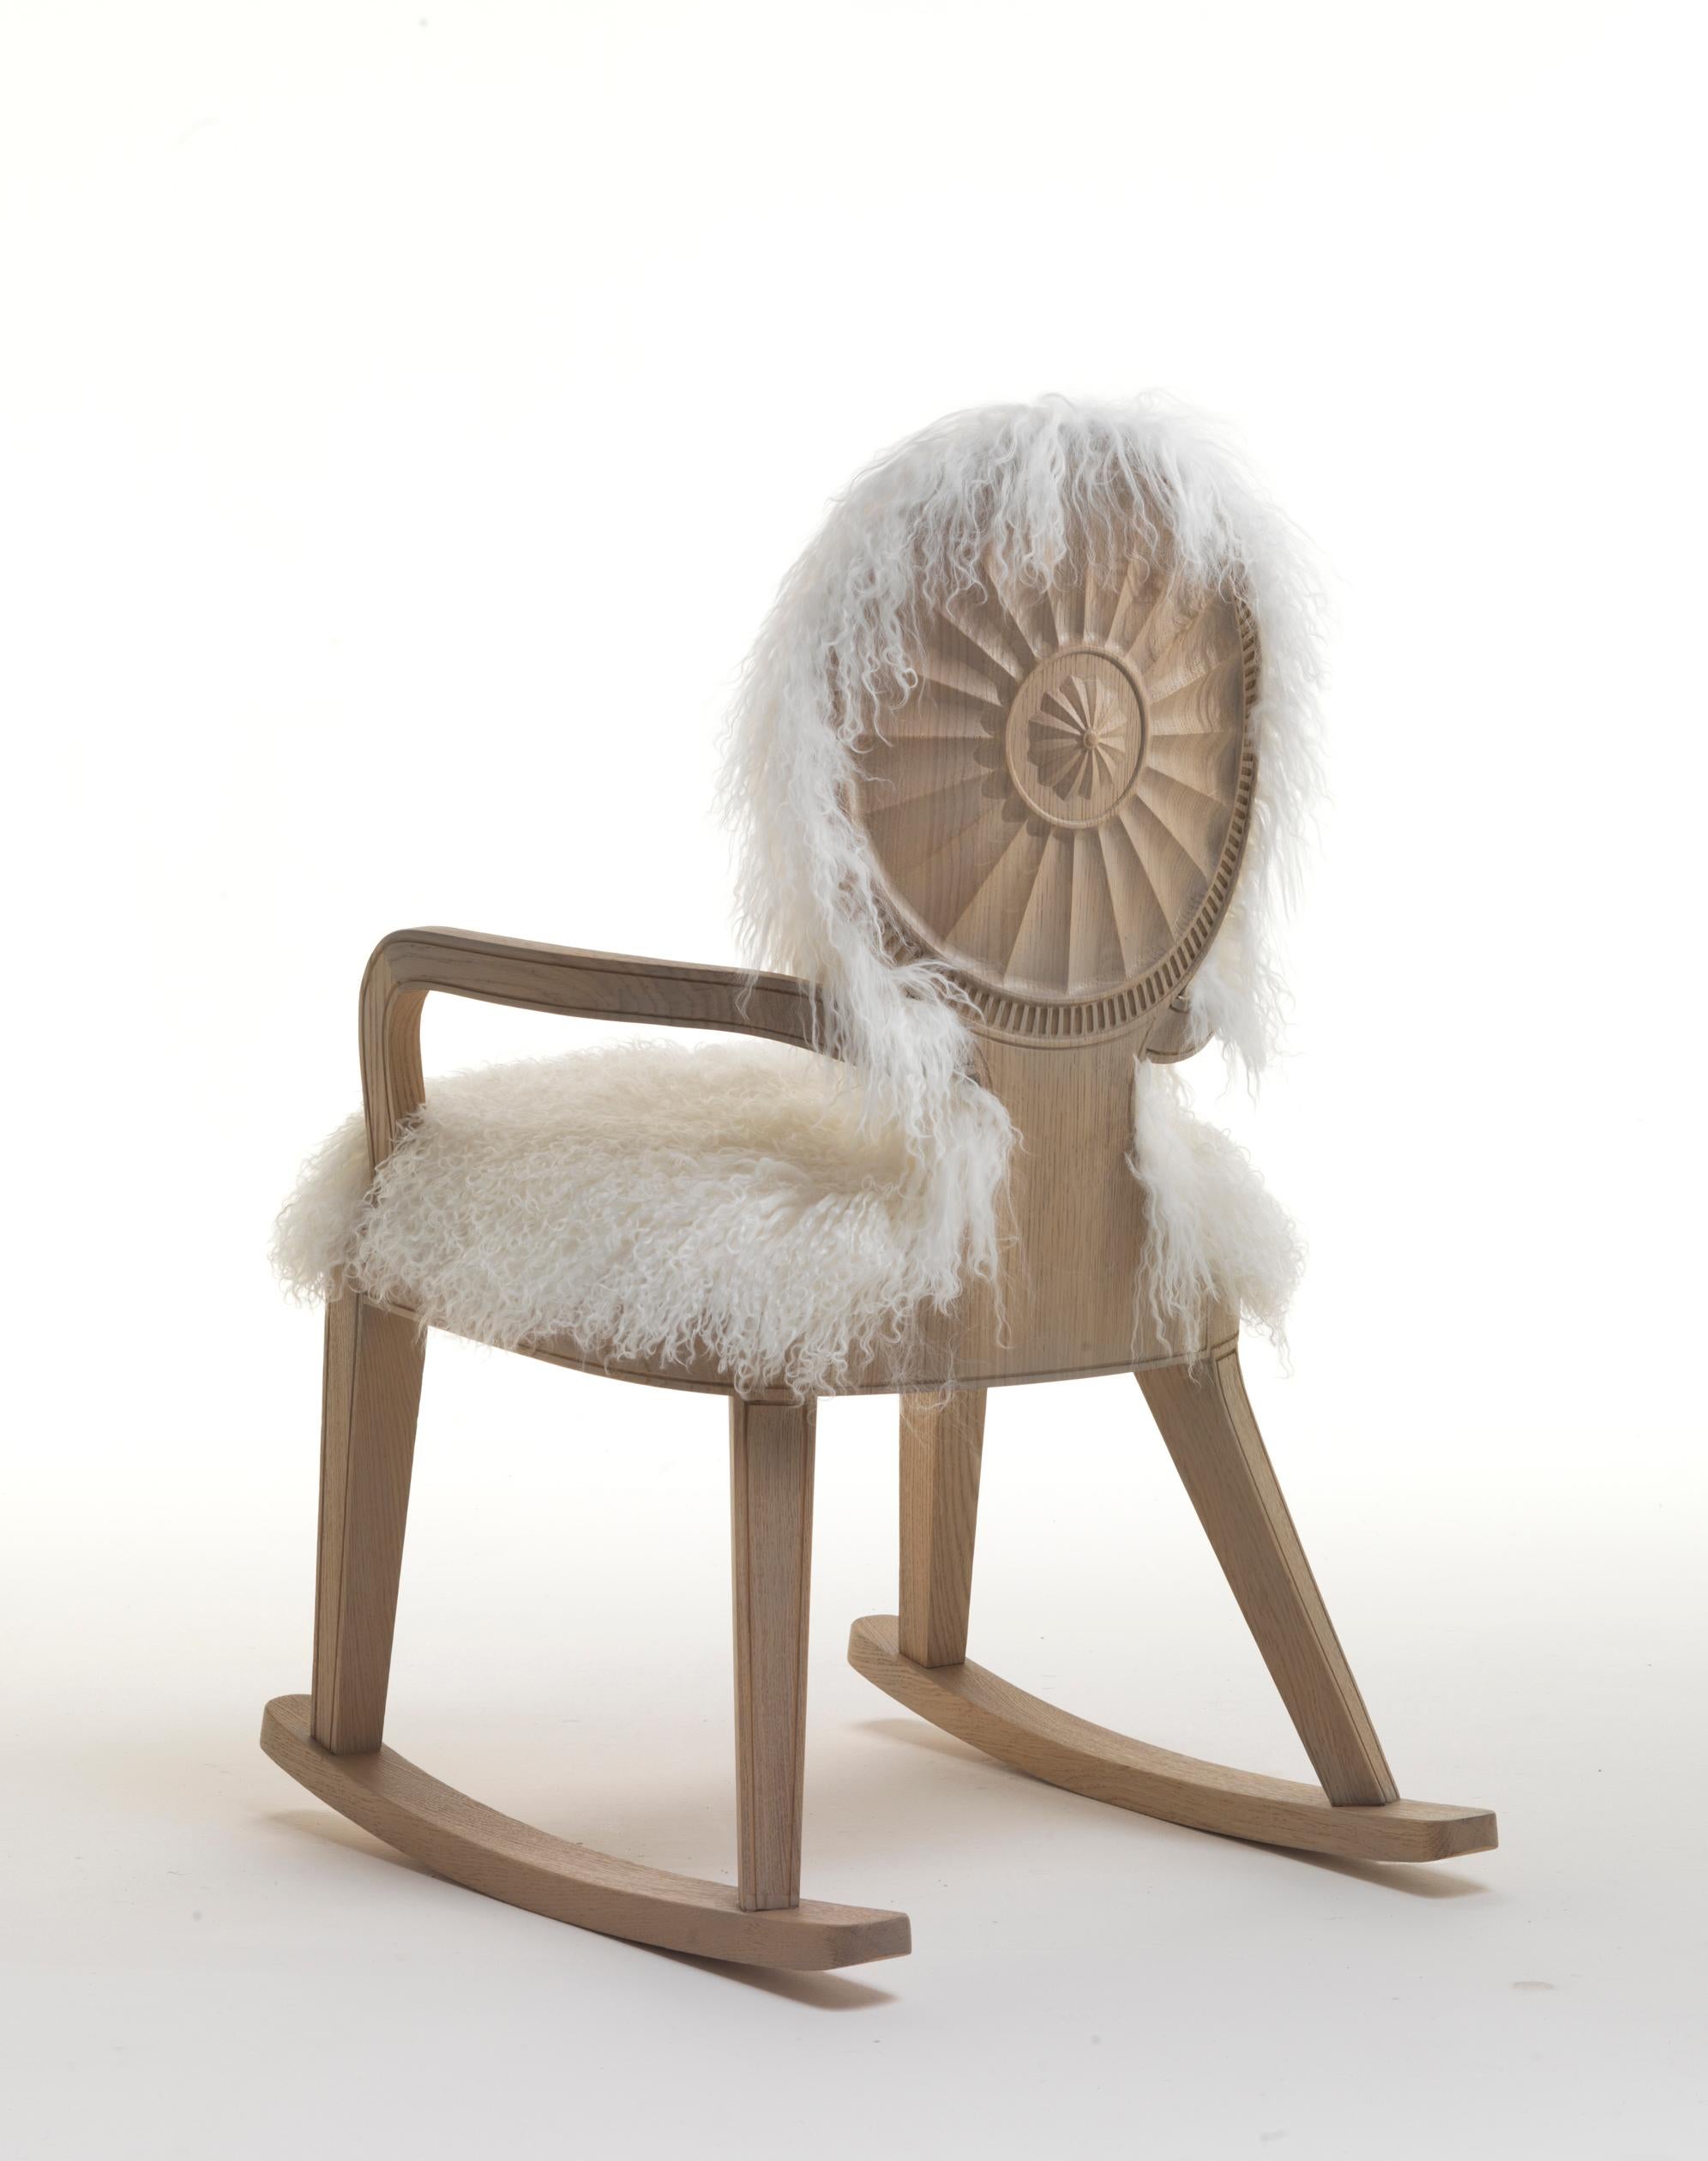 Our Monarch chair is an exquisite creation designed by Archer Humphryes Architects that transcends the conventional rocking chair design. This handcrafted masterpiece is a harmonious interplay of structure and upholstery, redefining the art of